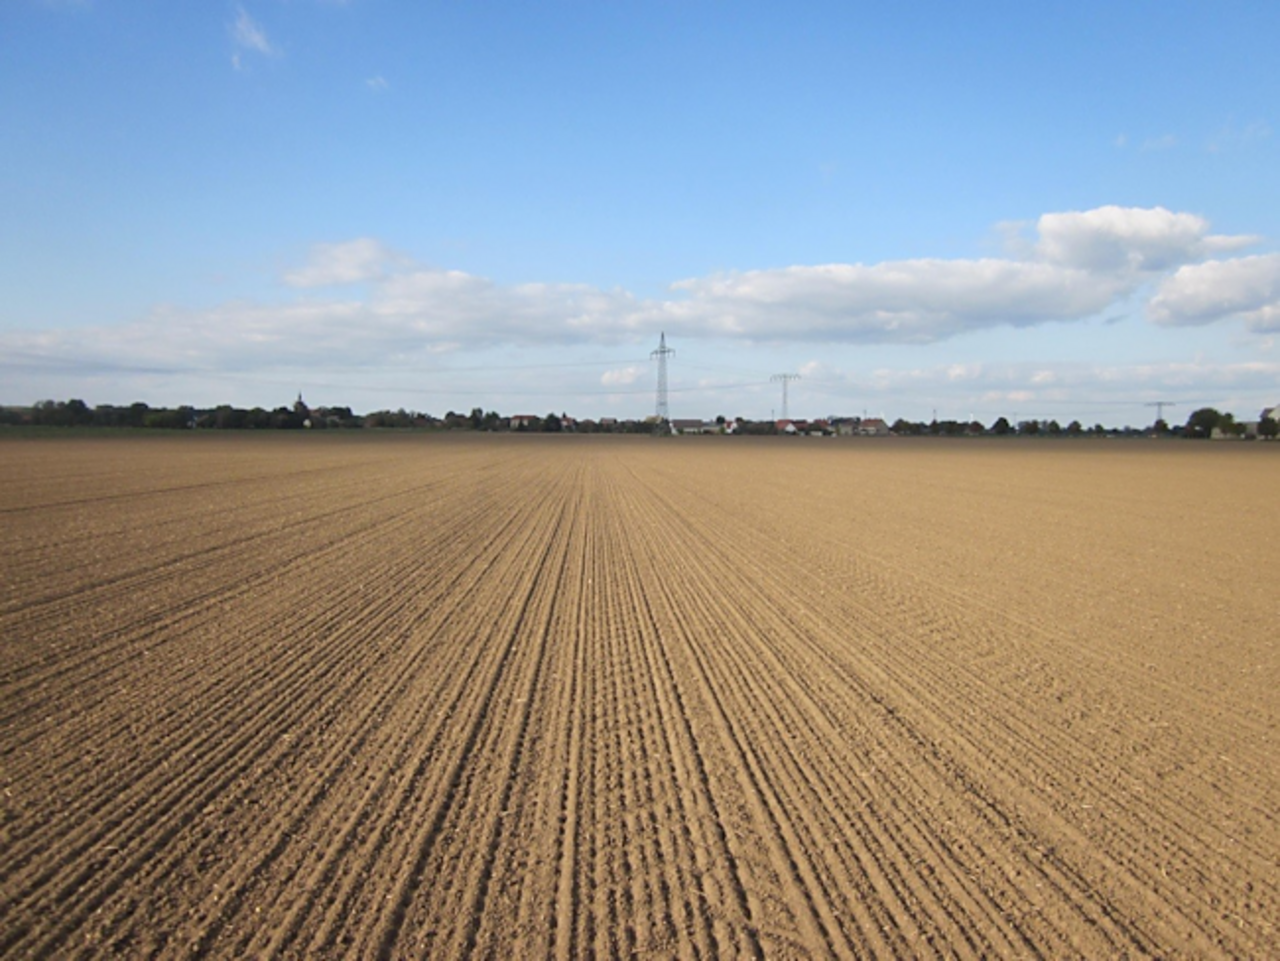 Intensive arable agriculture with large fields – are they sustainable and climate smart?